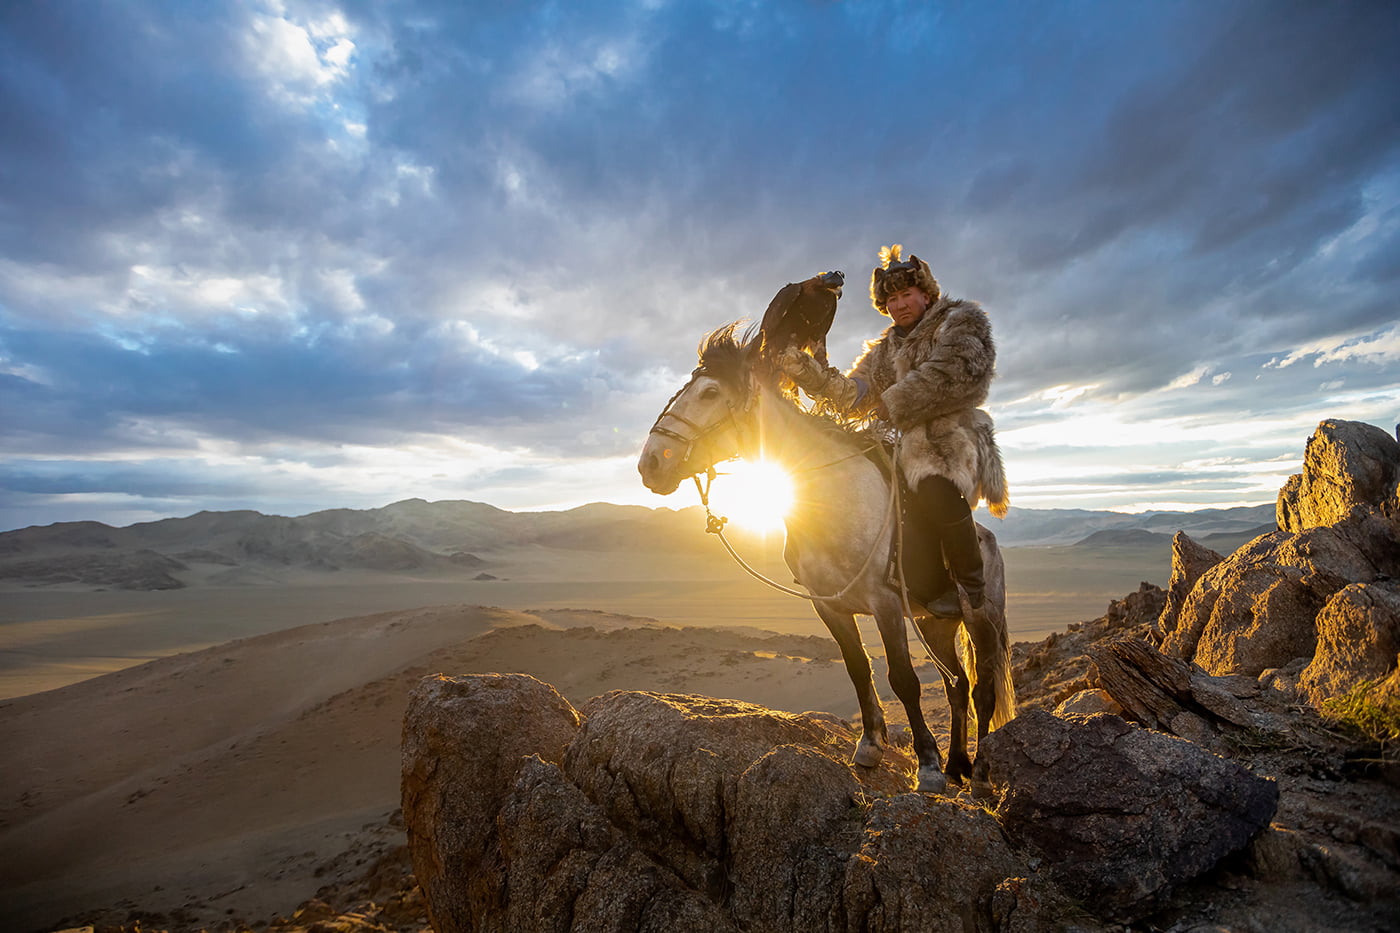 Botei Rys, a Kazakh Eagle Hunter with his eagle from Altantsögts district of Bayan-Ölgii Province in western Mongolia.